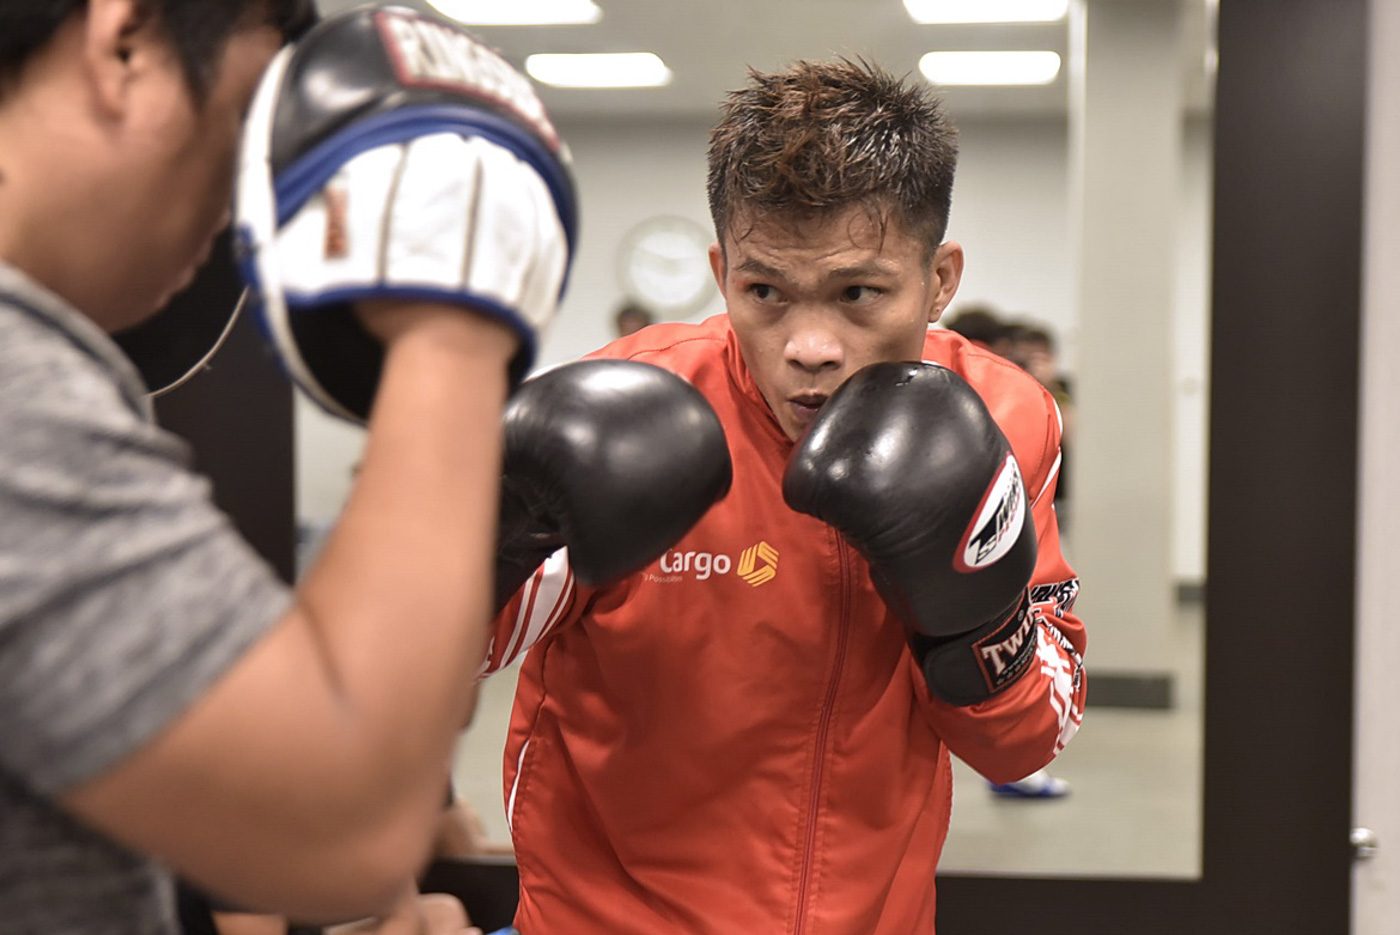 Ancajas tackles Rodriguez first before getting 2nd vaccine jab